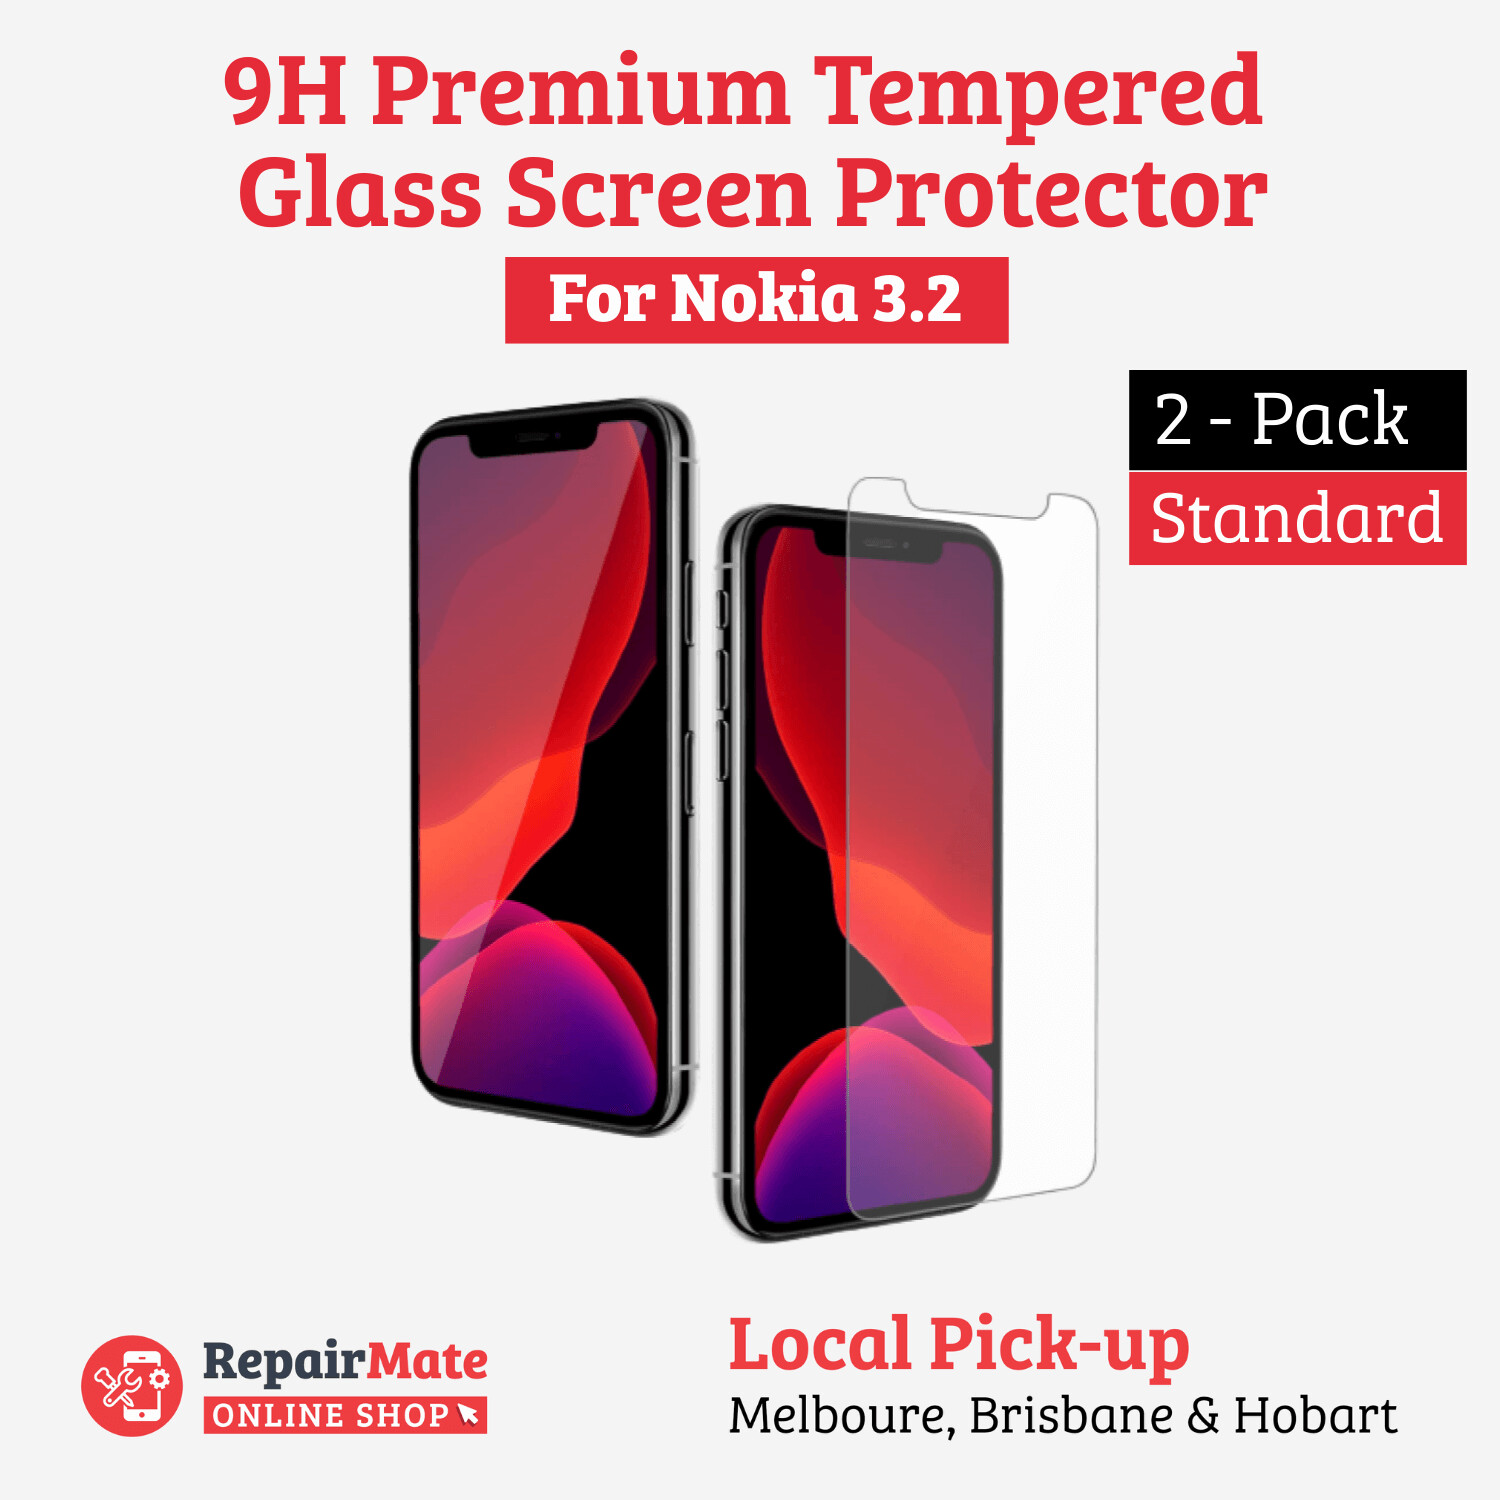 Nokia 3.2 9H Premium Tempered Glass Screen Protector [2 Pack]